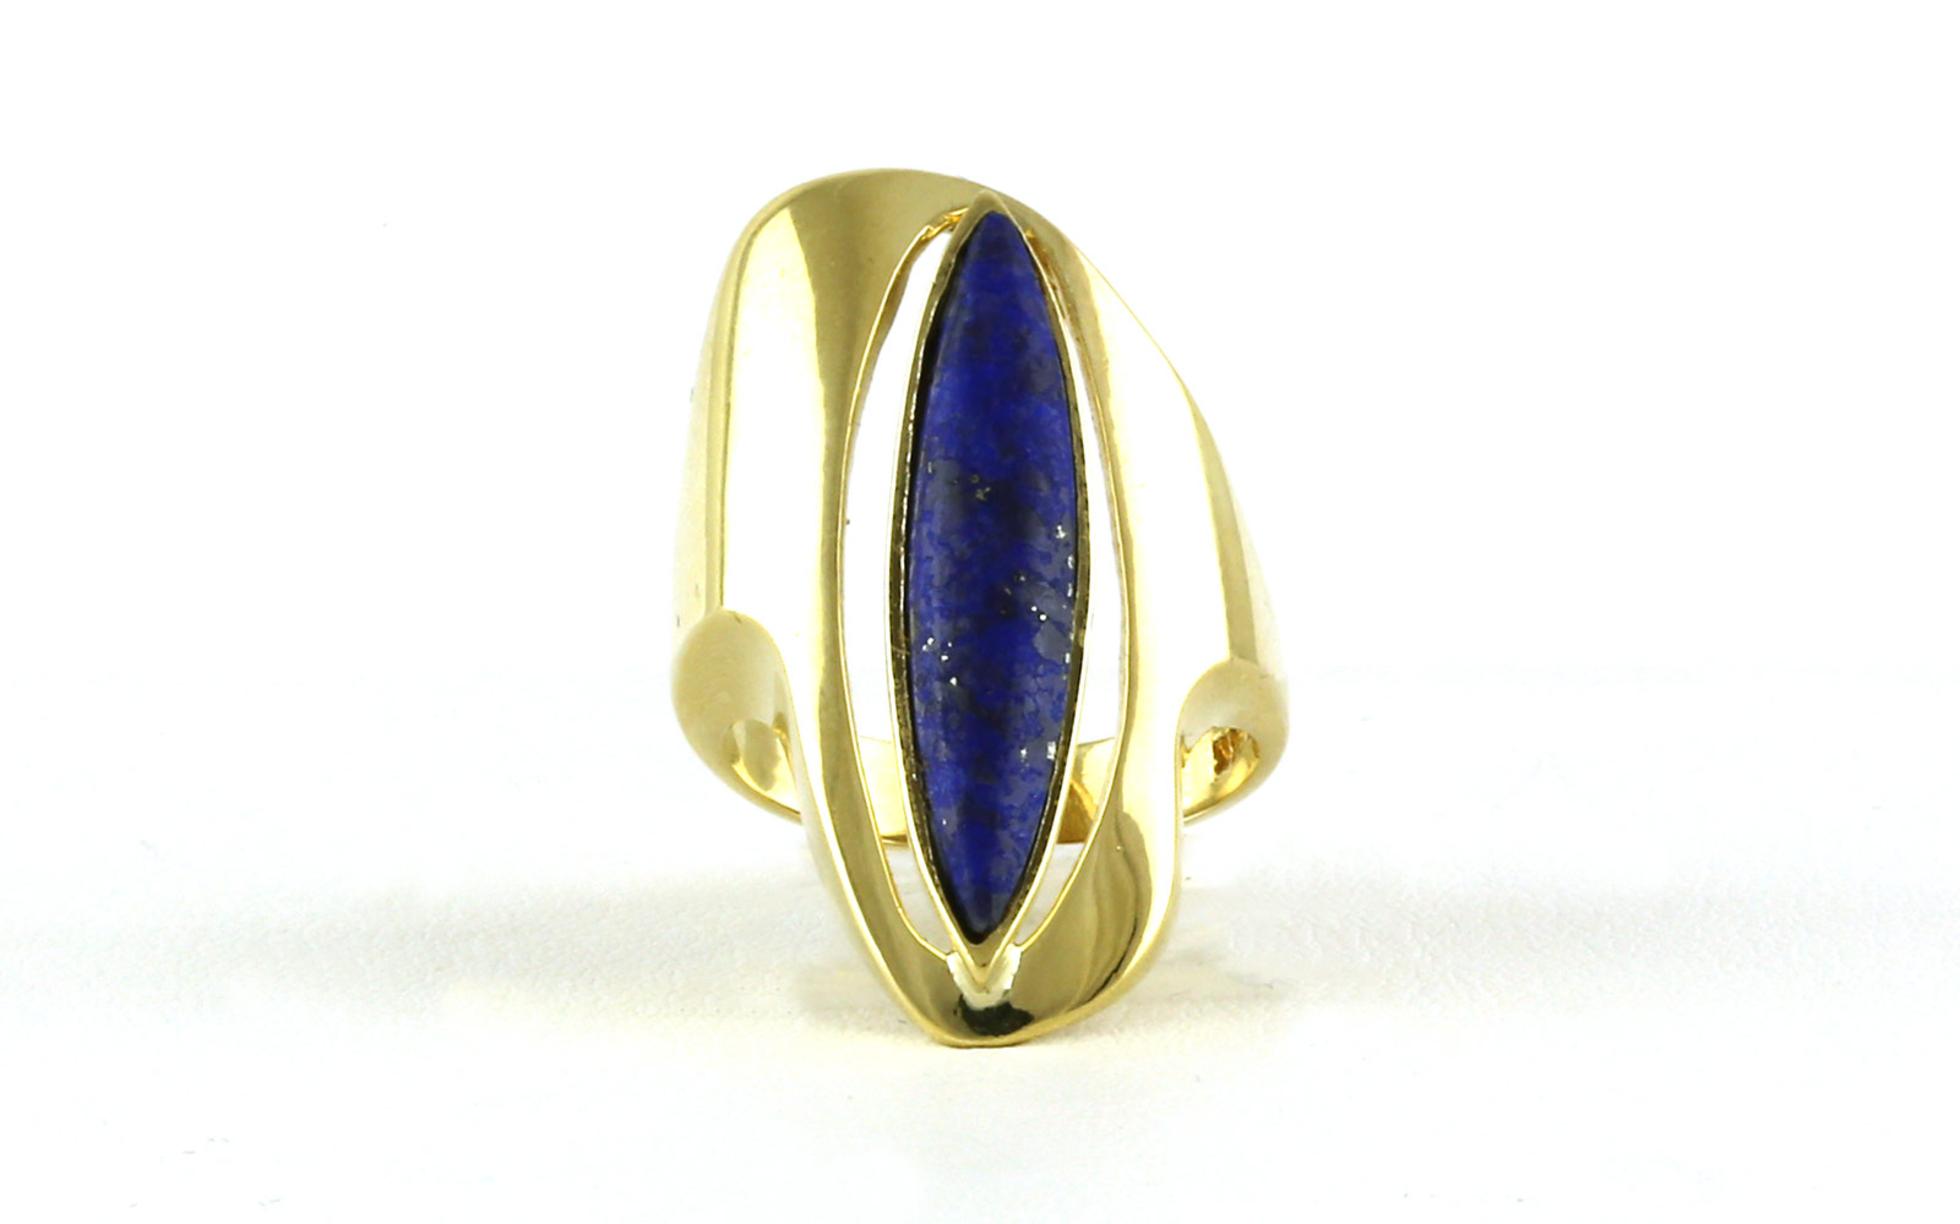 Estate Piece: Bezel-set Marquise-shaped Lapis Cocktail Ring in Yellow Gold